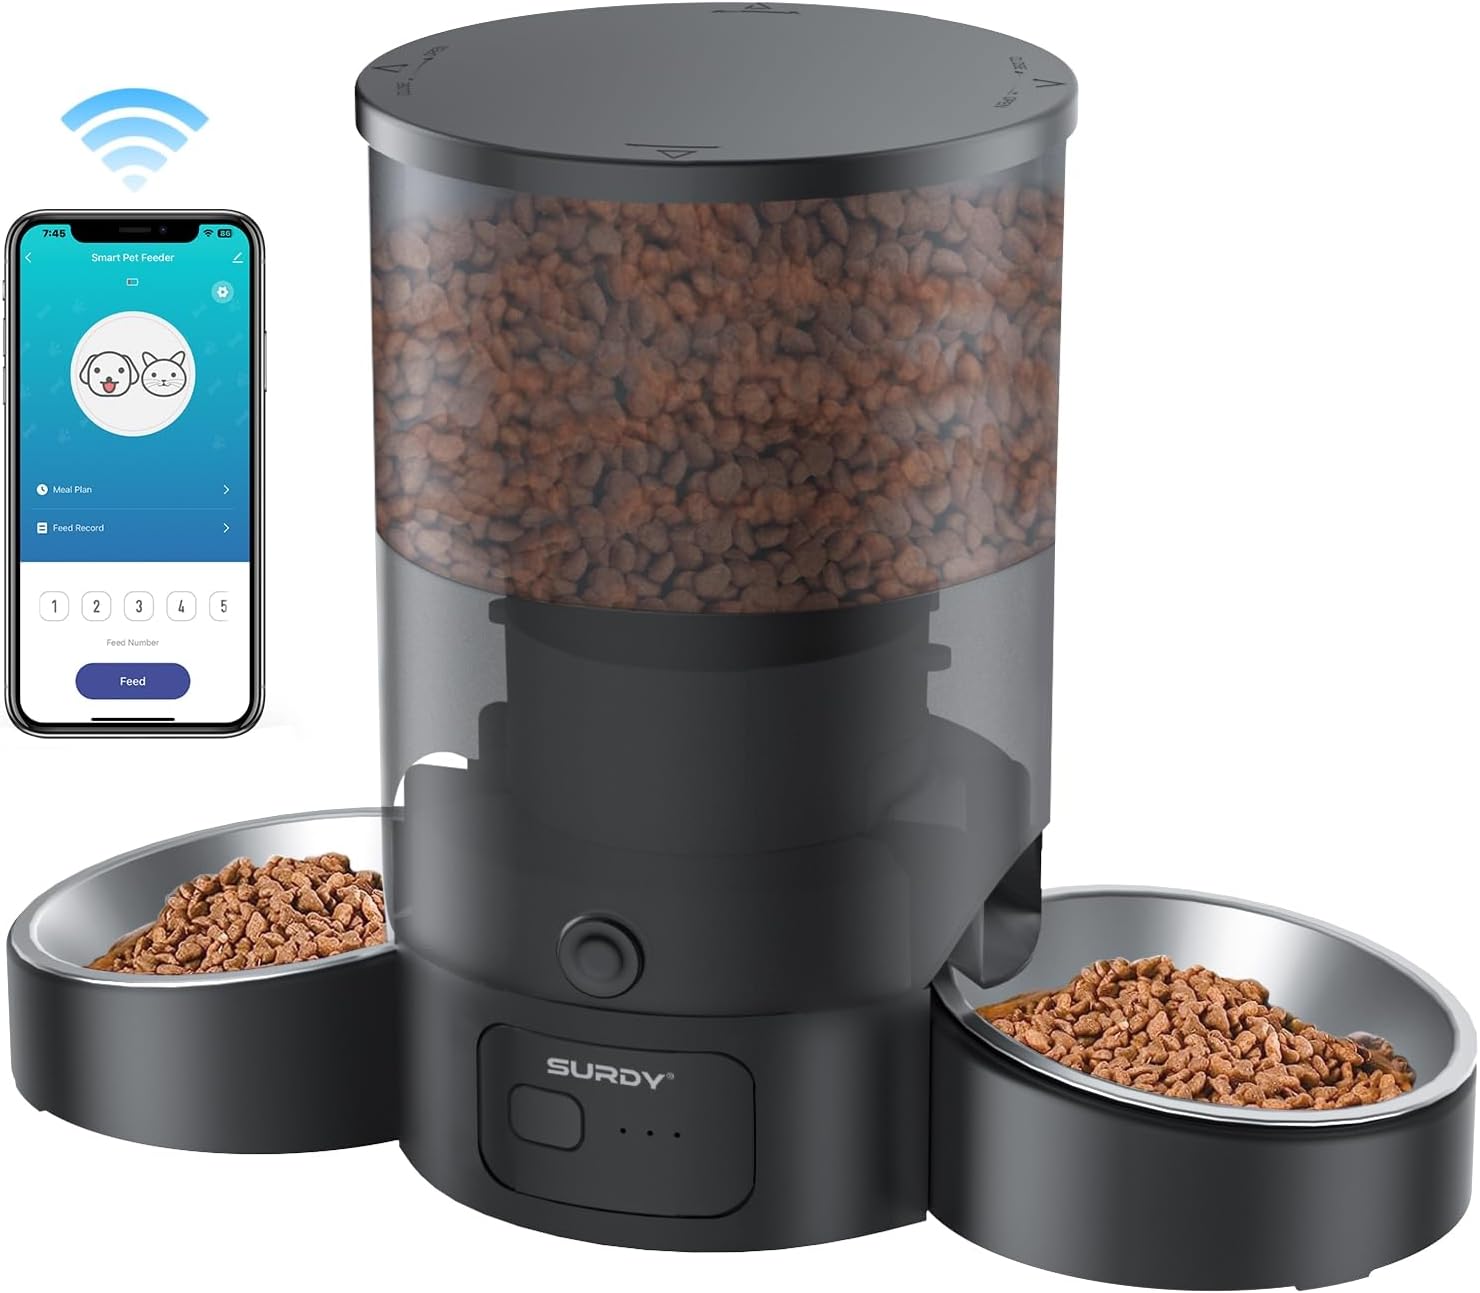 Automatic Cat Food Dispenser, SURDY 2.4G WiFi Pet Feeder with APP Control for Remote Feeding, 3L Automatic Cat Feeder for Two Cats, Dogs  Small Pets 1-10 Meals, Dual Power Supply, 10s Meal Call